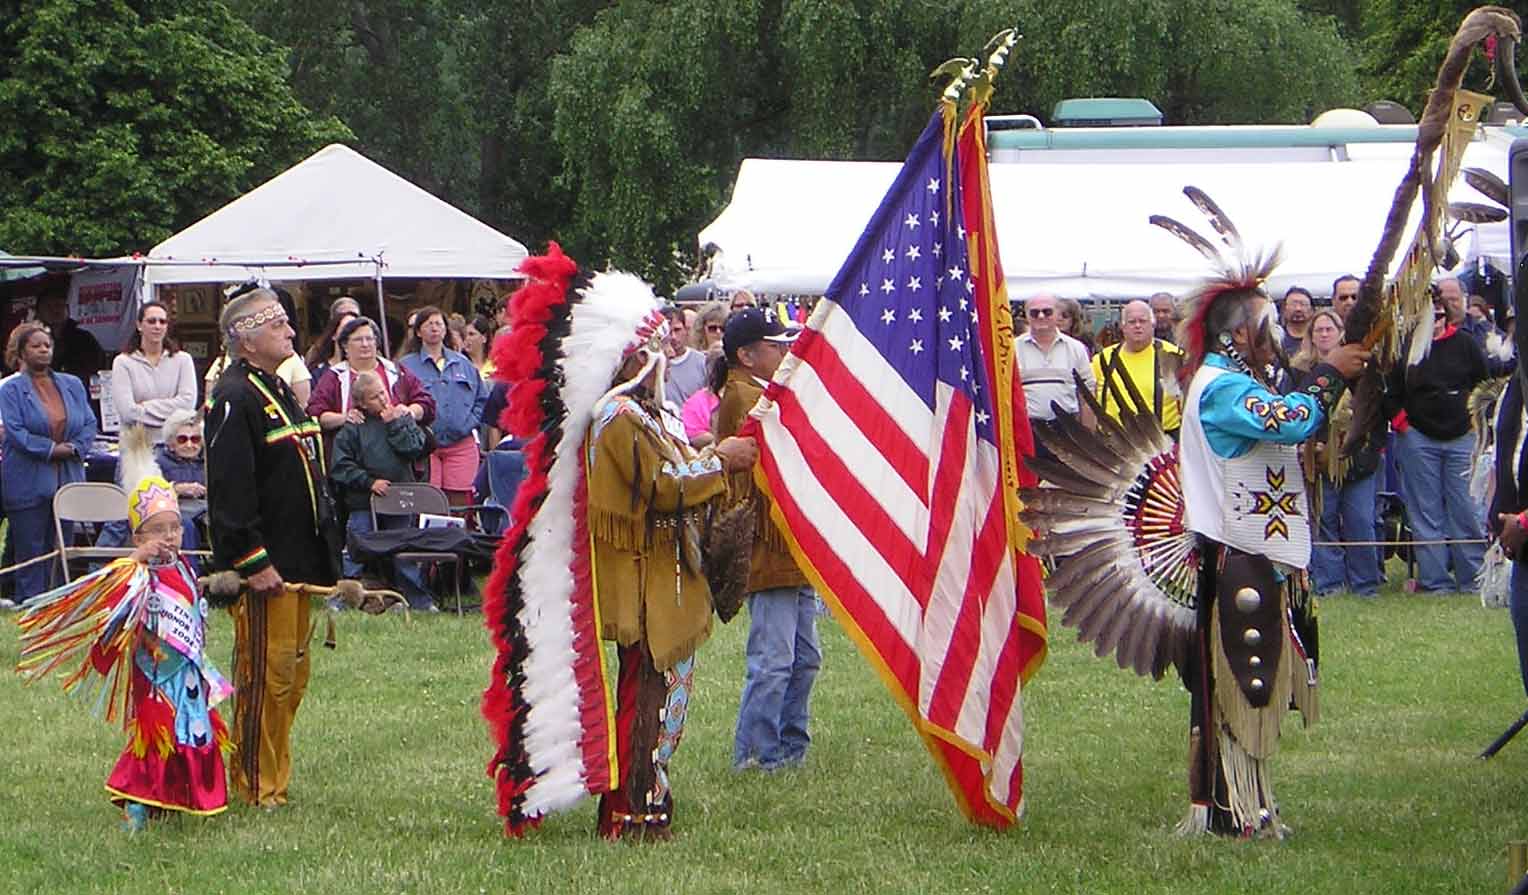 American Indians at Cleveland Powwow holding flag